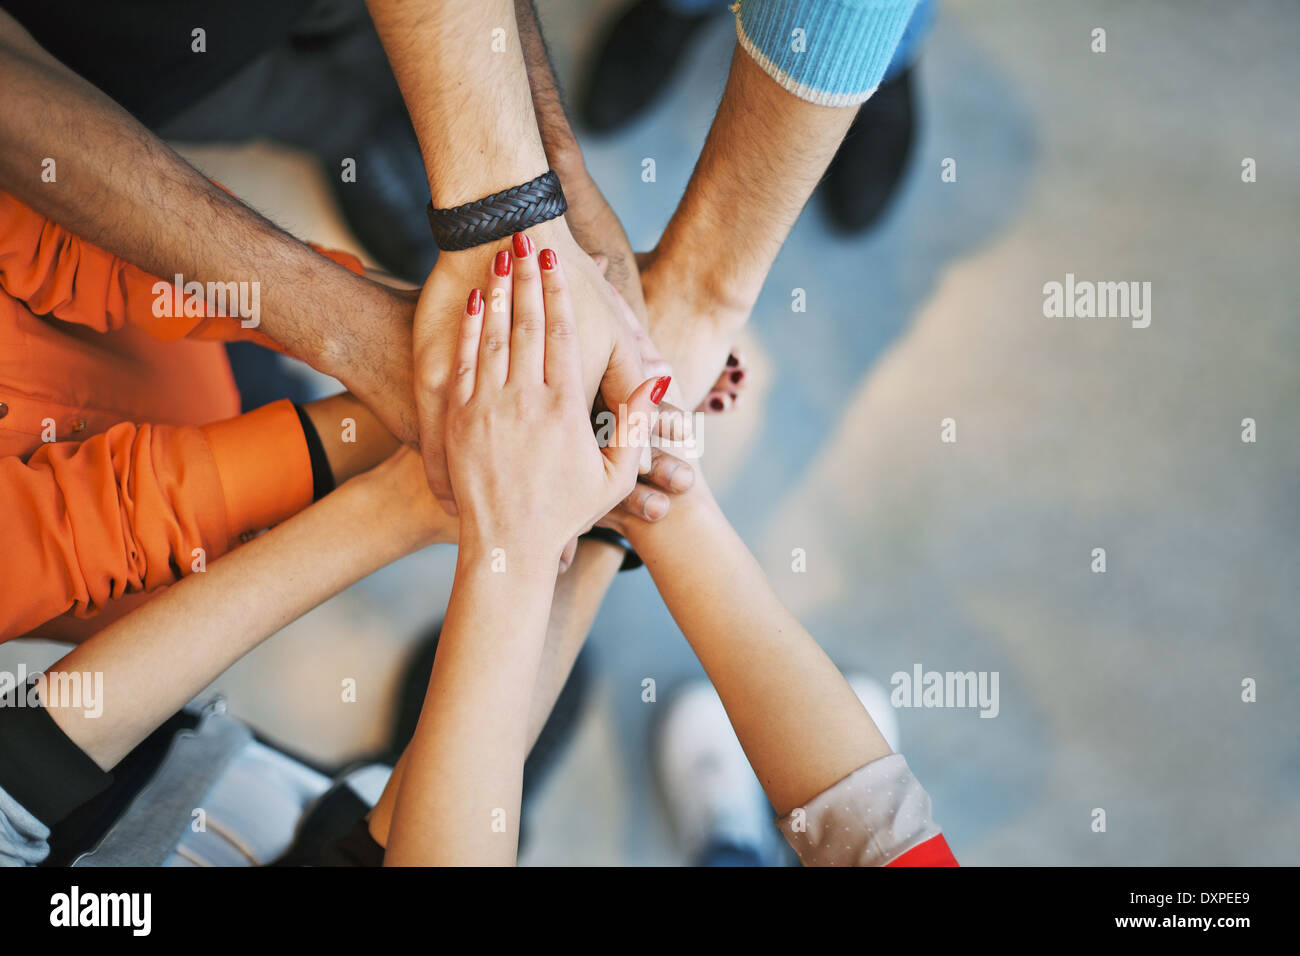 Multiethnic group of young people putting their hands on top of each other. Close up image of young students stacking hands. Stock Photo